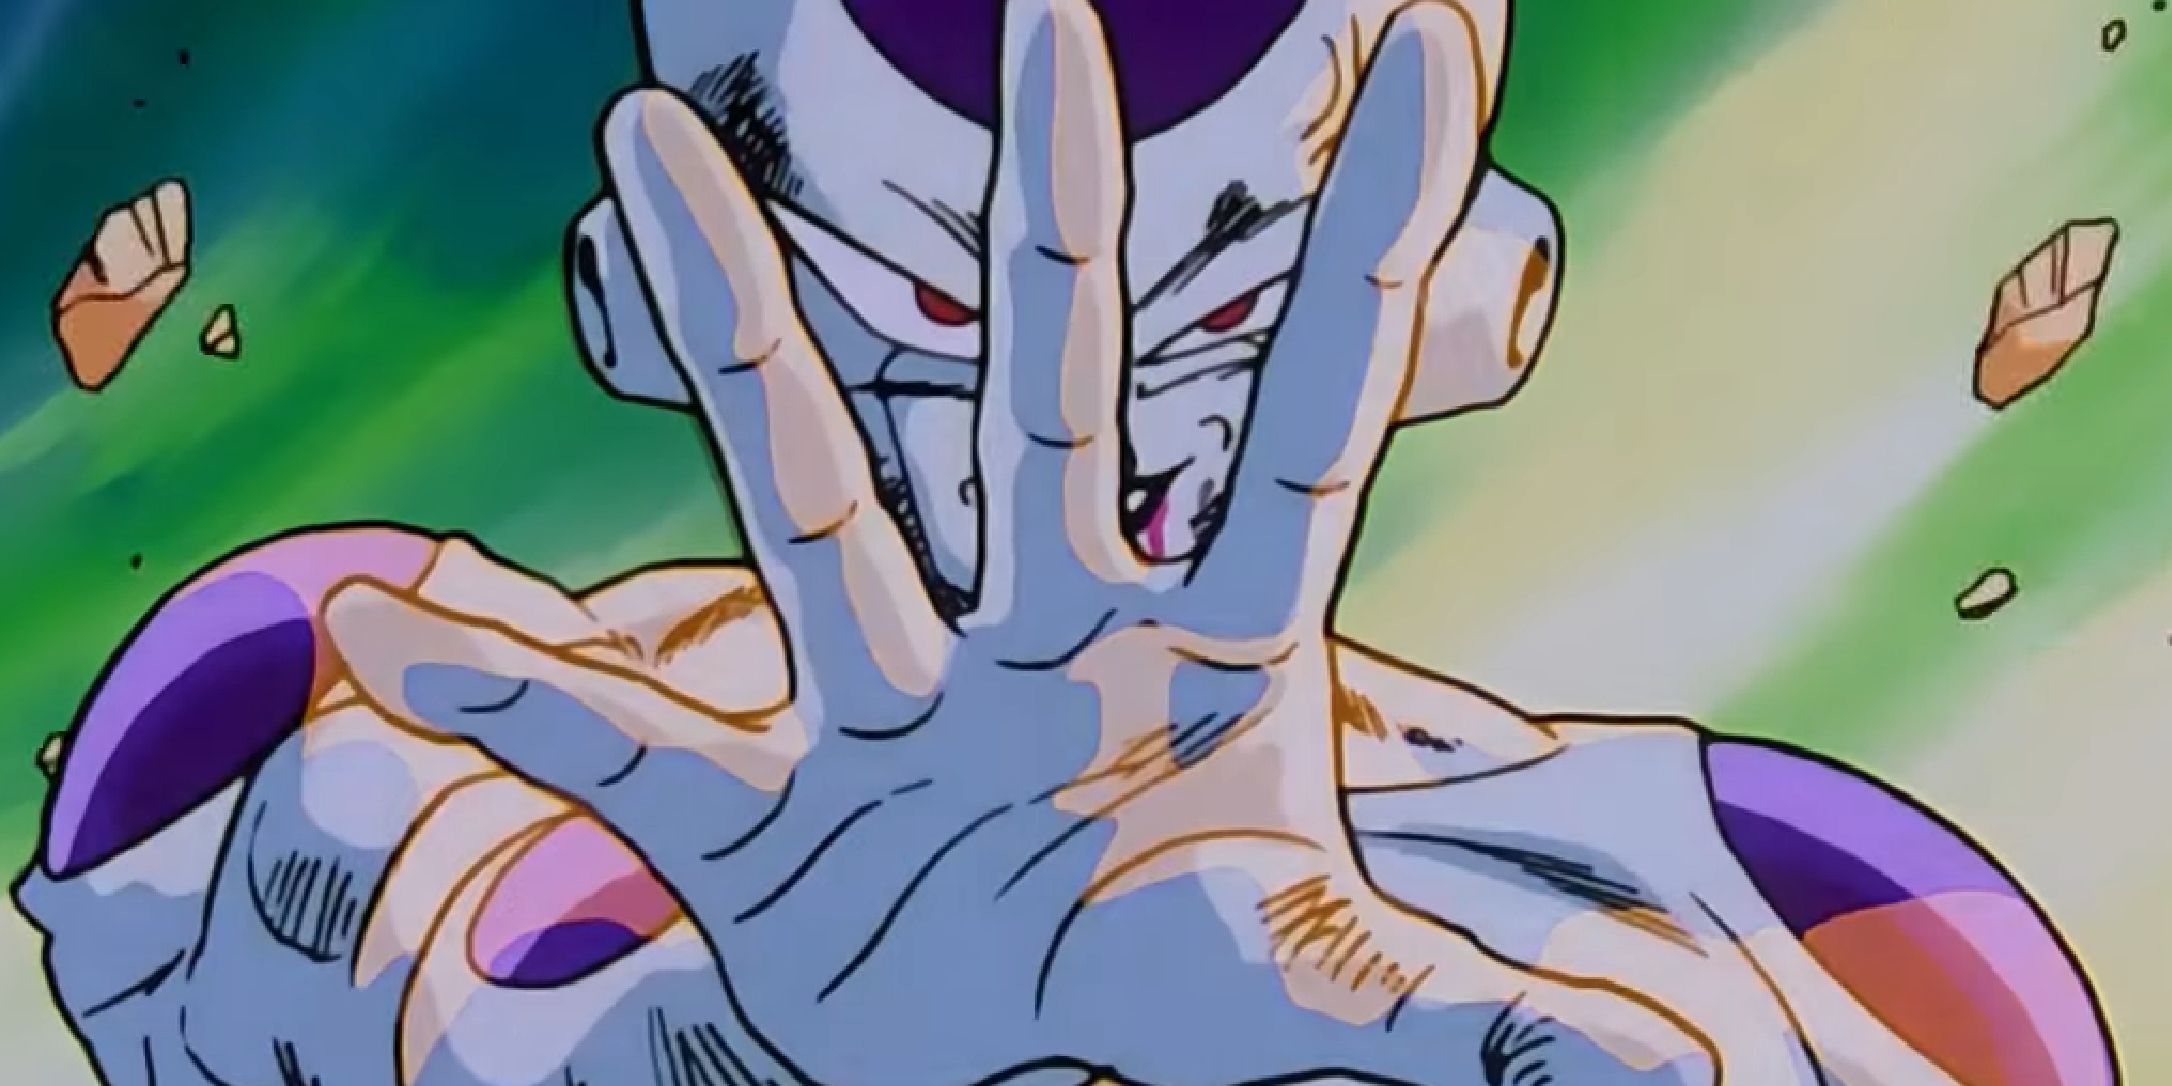 Frieza gives a five-minute warning on Planet Namek in Dragon Ball Z